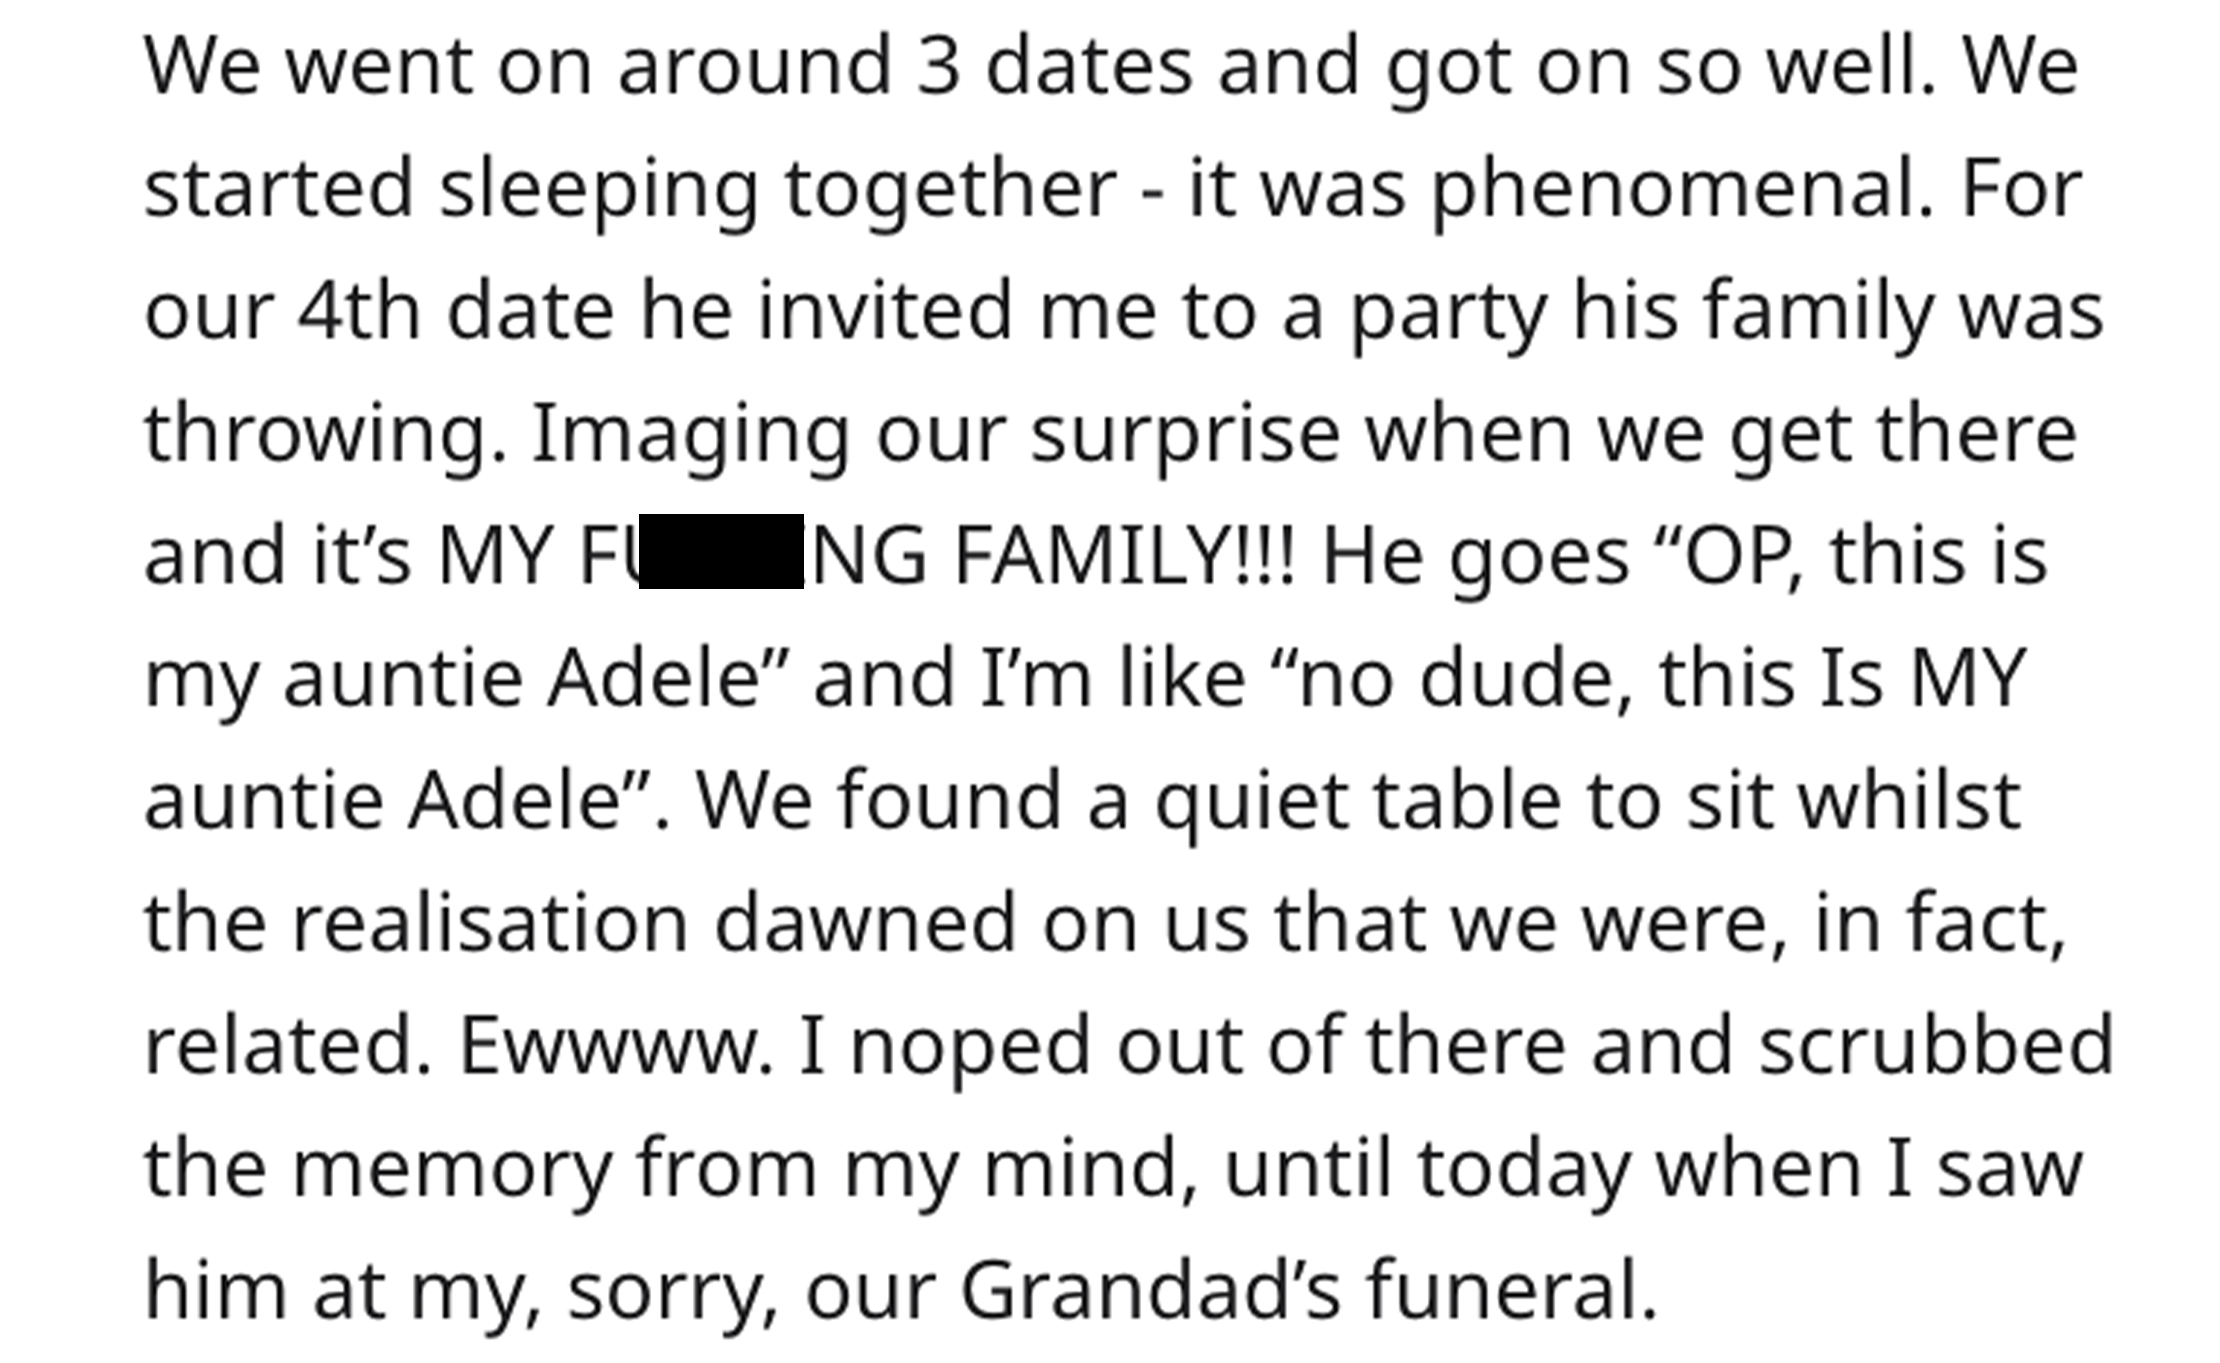 Cousins Sleep Together Reddit - handwriting - We went on around 3 dates and got on so well. We started sleeping together it was phenomenal. For our 4th date he invited me to a party his family was throwing. Imaging our surprise when we get there and it's 